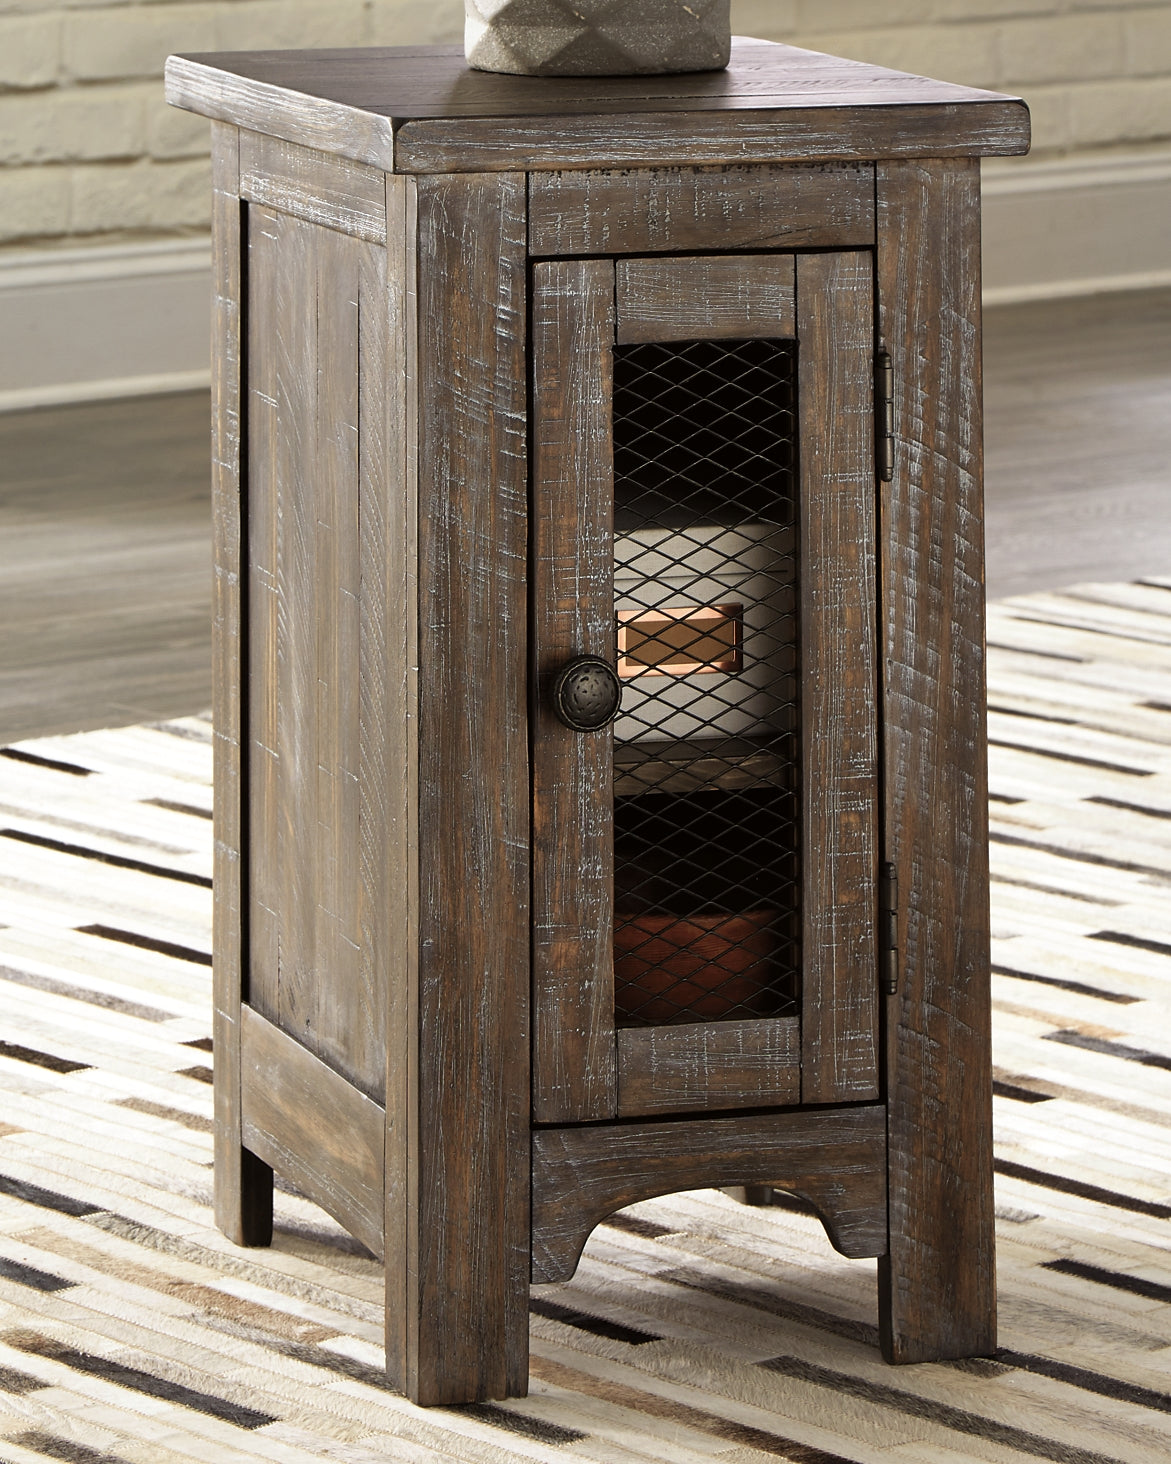 Danell Ridge 2 End Tables Signature Design by Ashley®